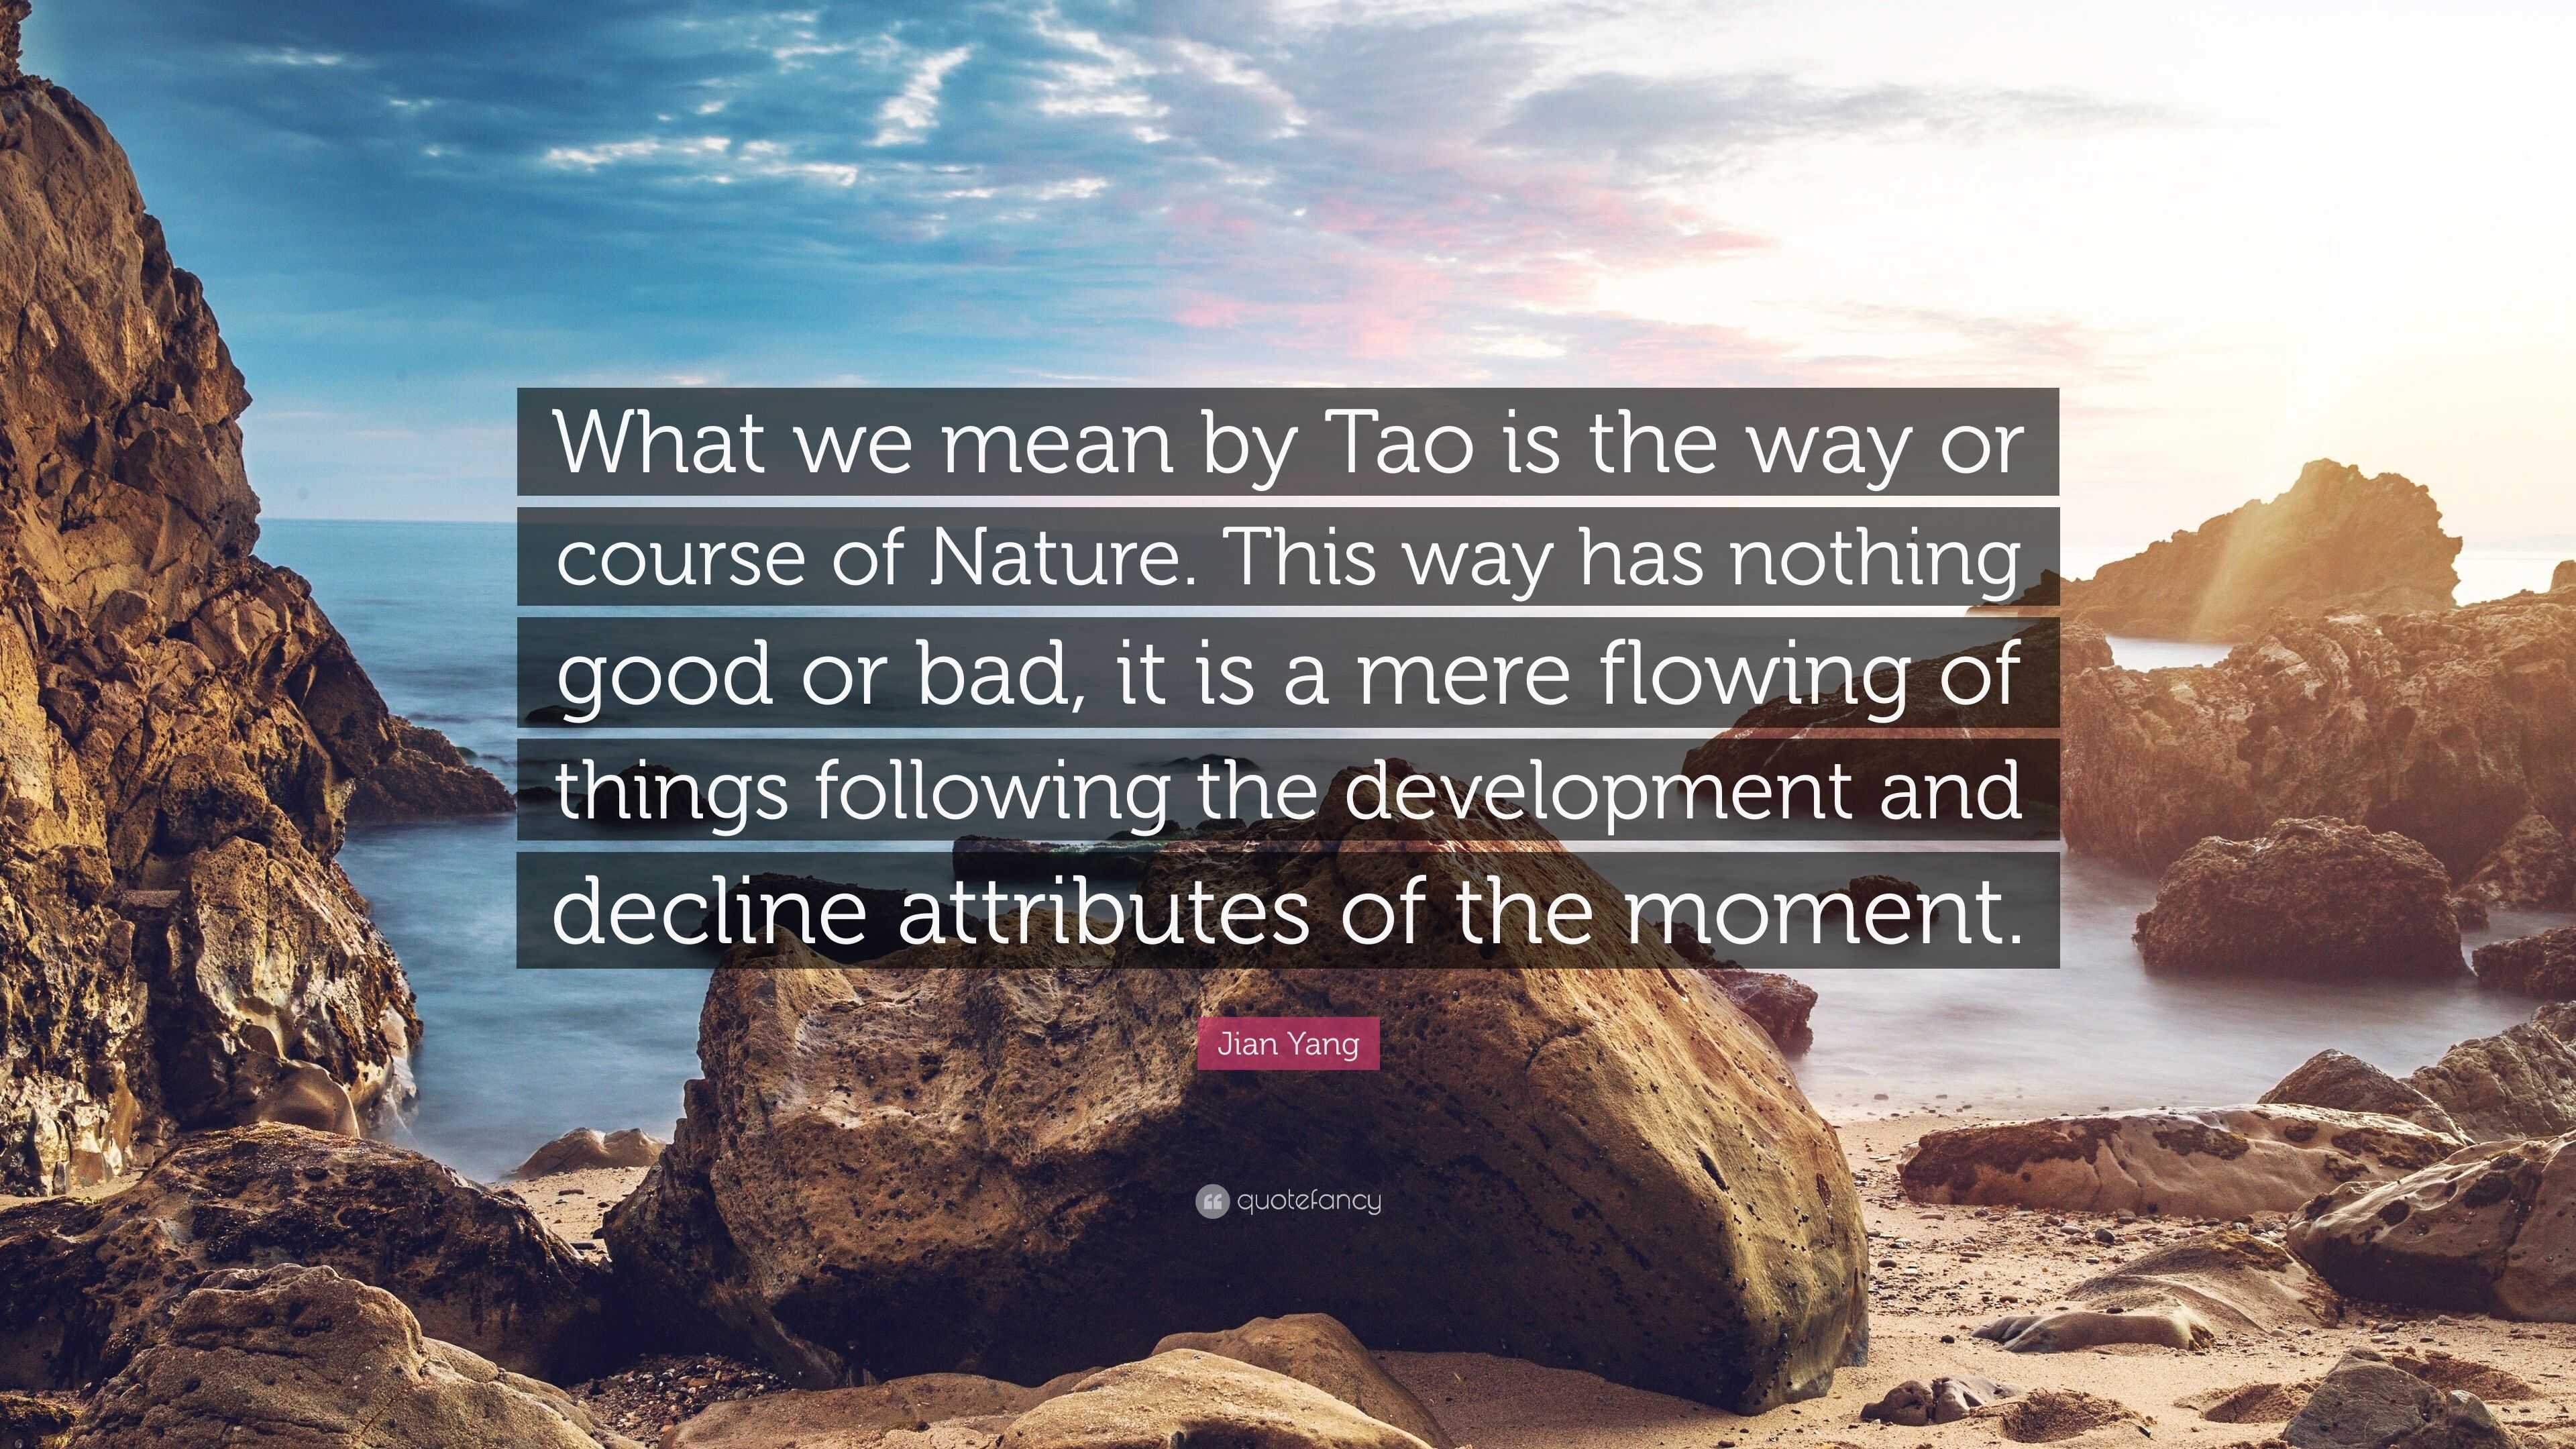 Jian Yang Quote: “What we mean by Tao is the way or course of Nature. This way has nothing good or bad, it is flowing of things fol...”